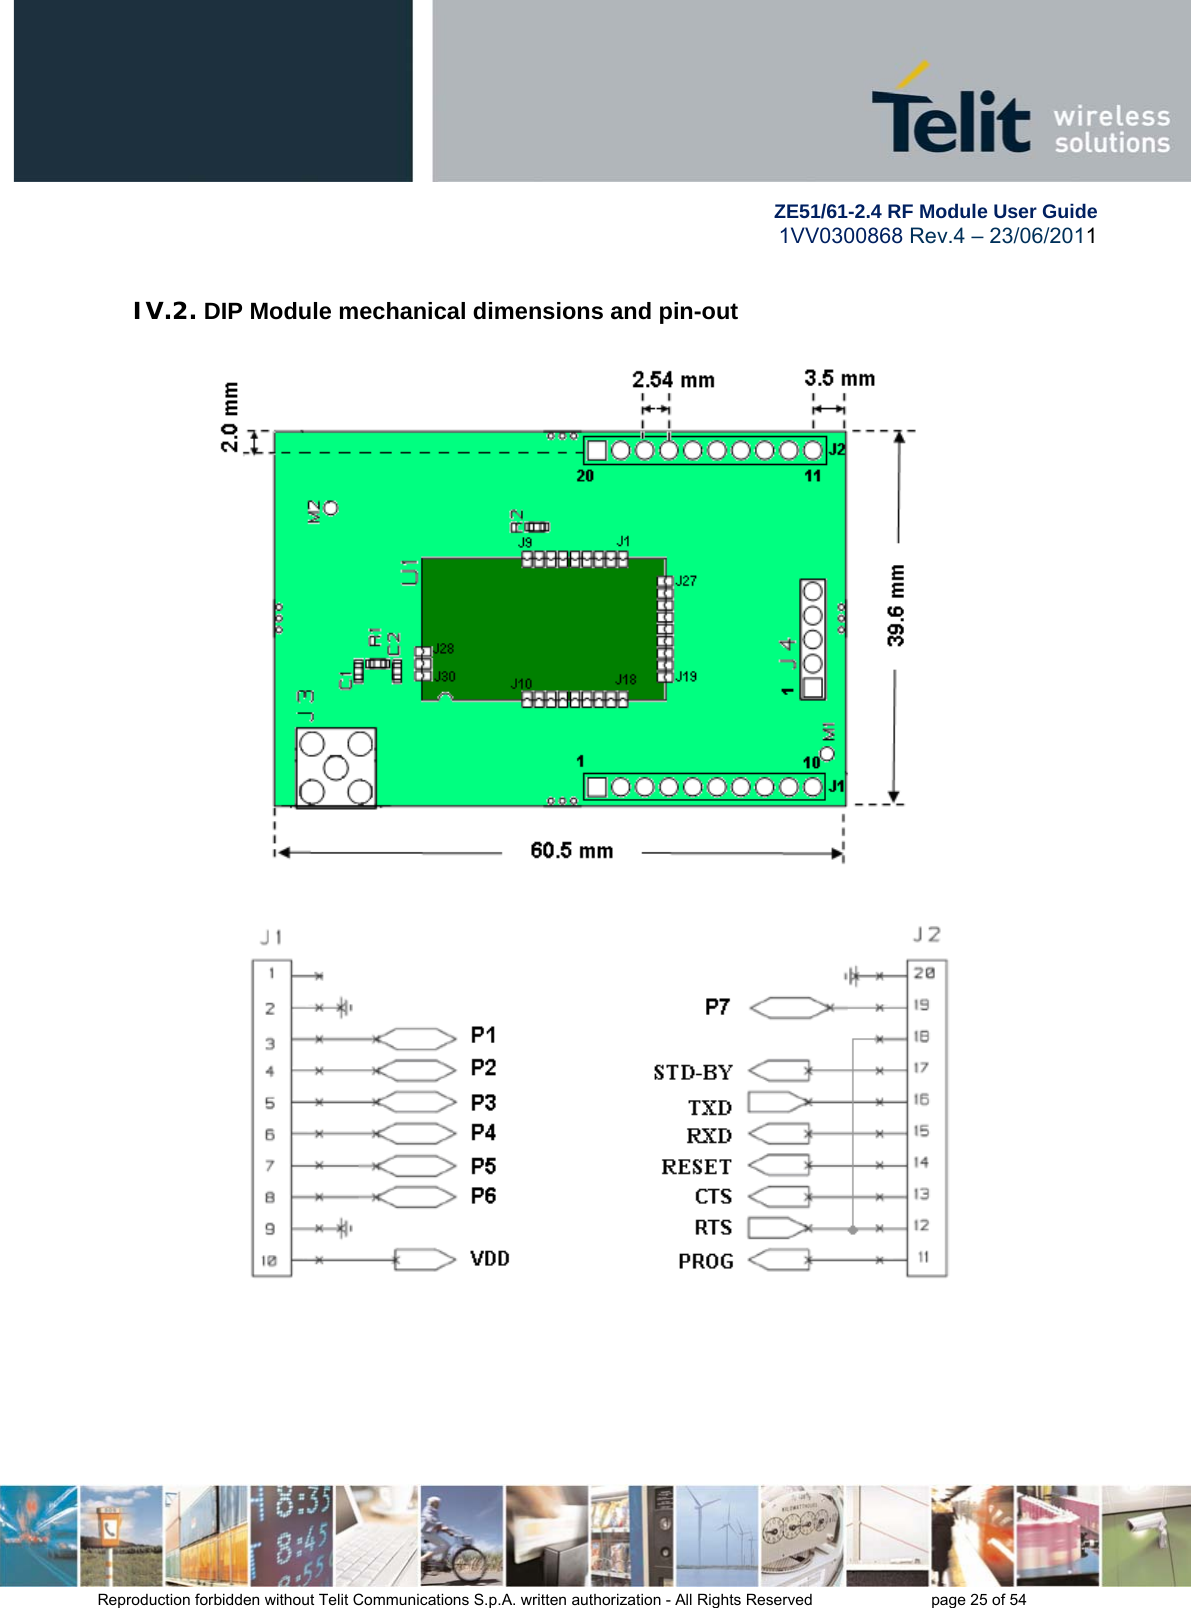        ZE51/61-2.4 RF Module User Guide 1VV0300868 Rev.4 – 23/06/2011 Reproduction forbidden without Telit Communications S.p.A. written authorization - All Rights Reserved    page 25 of 54  IV.2. DIP Module mechanical dimensions and pin-out      